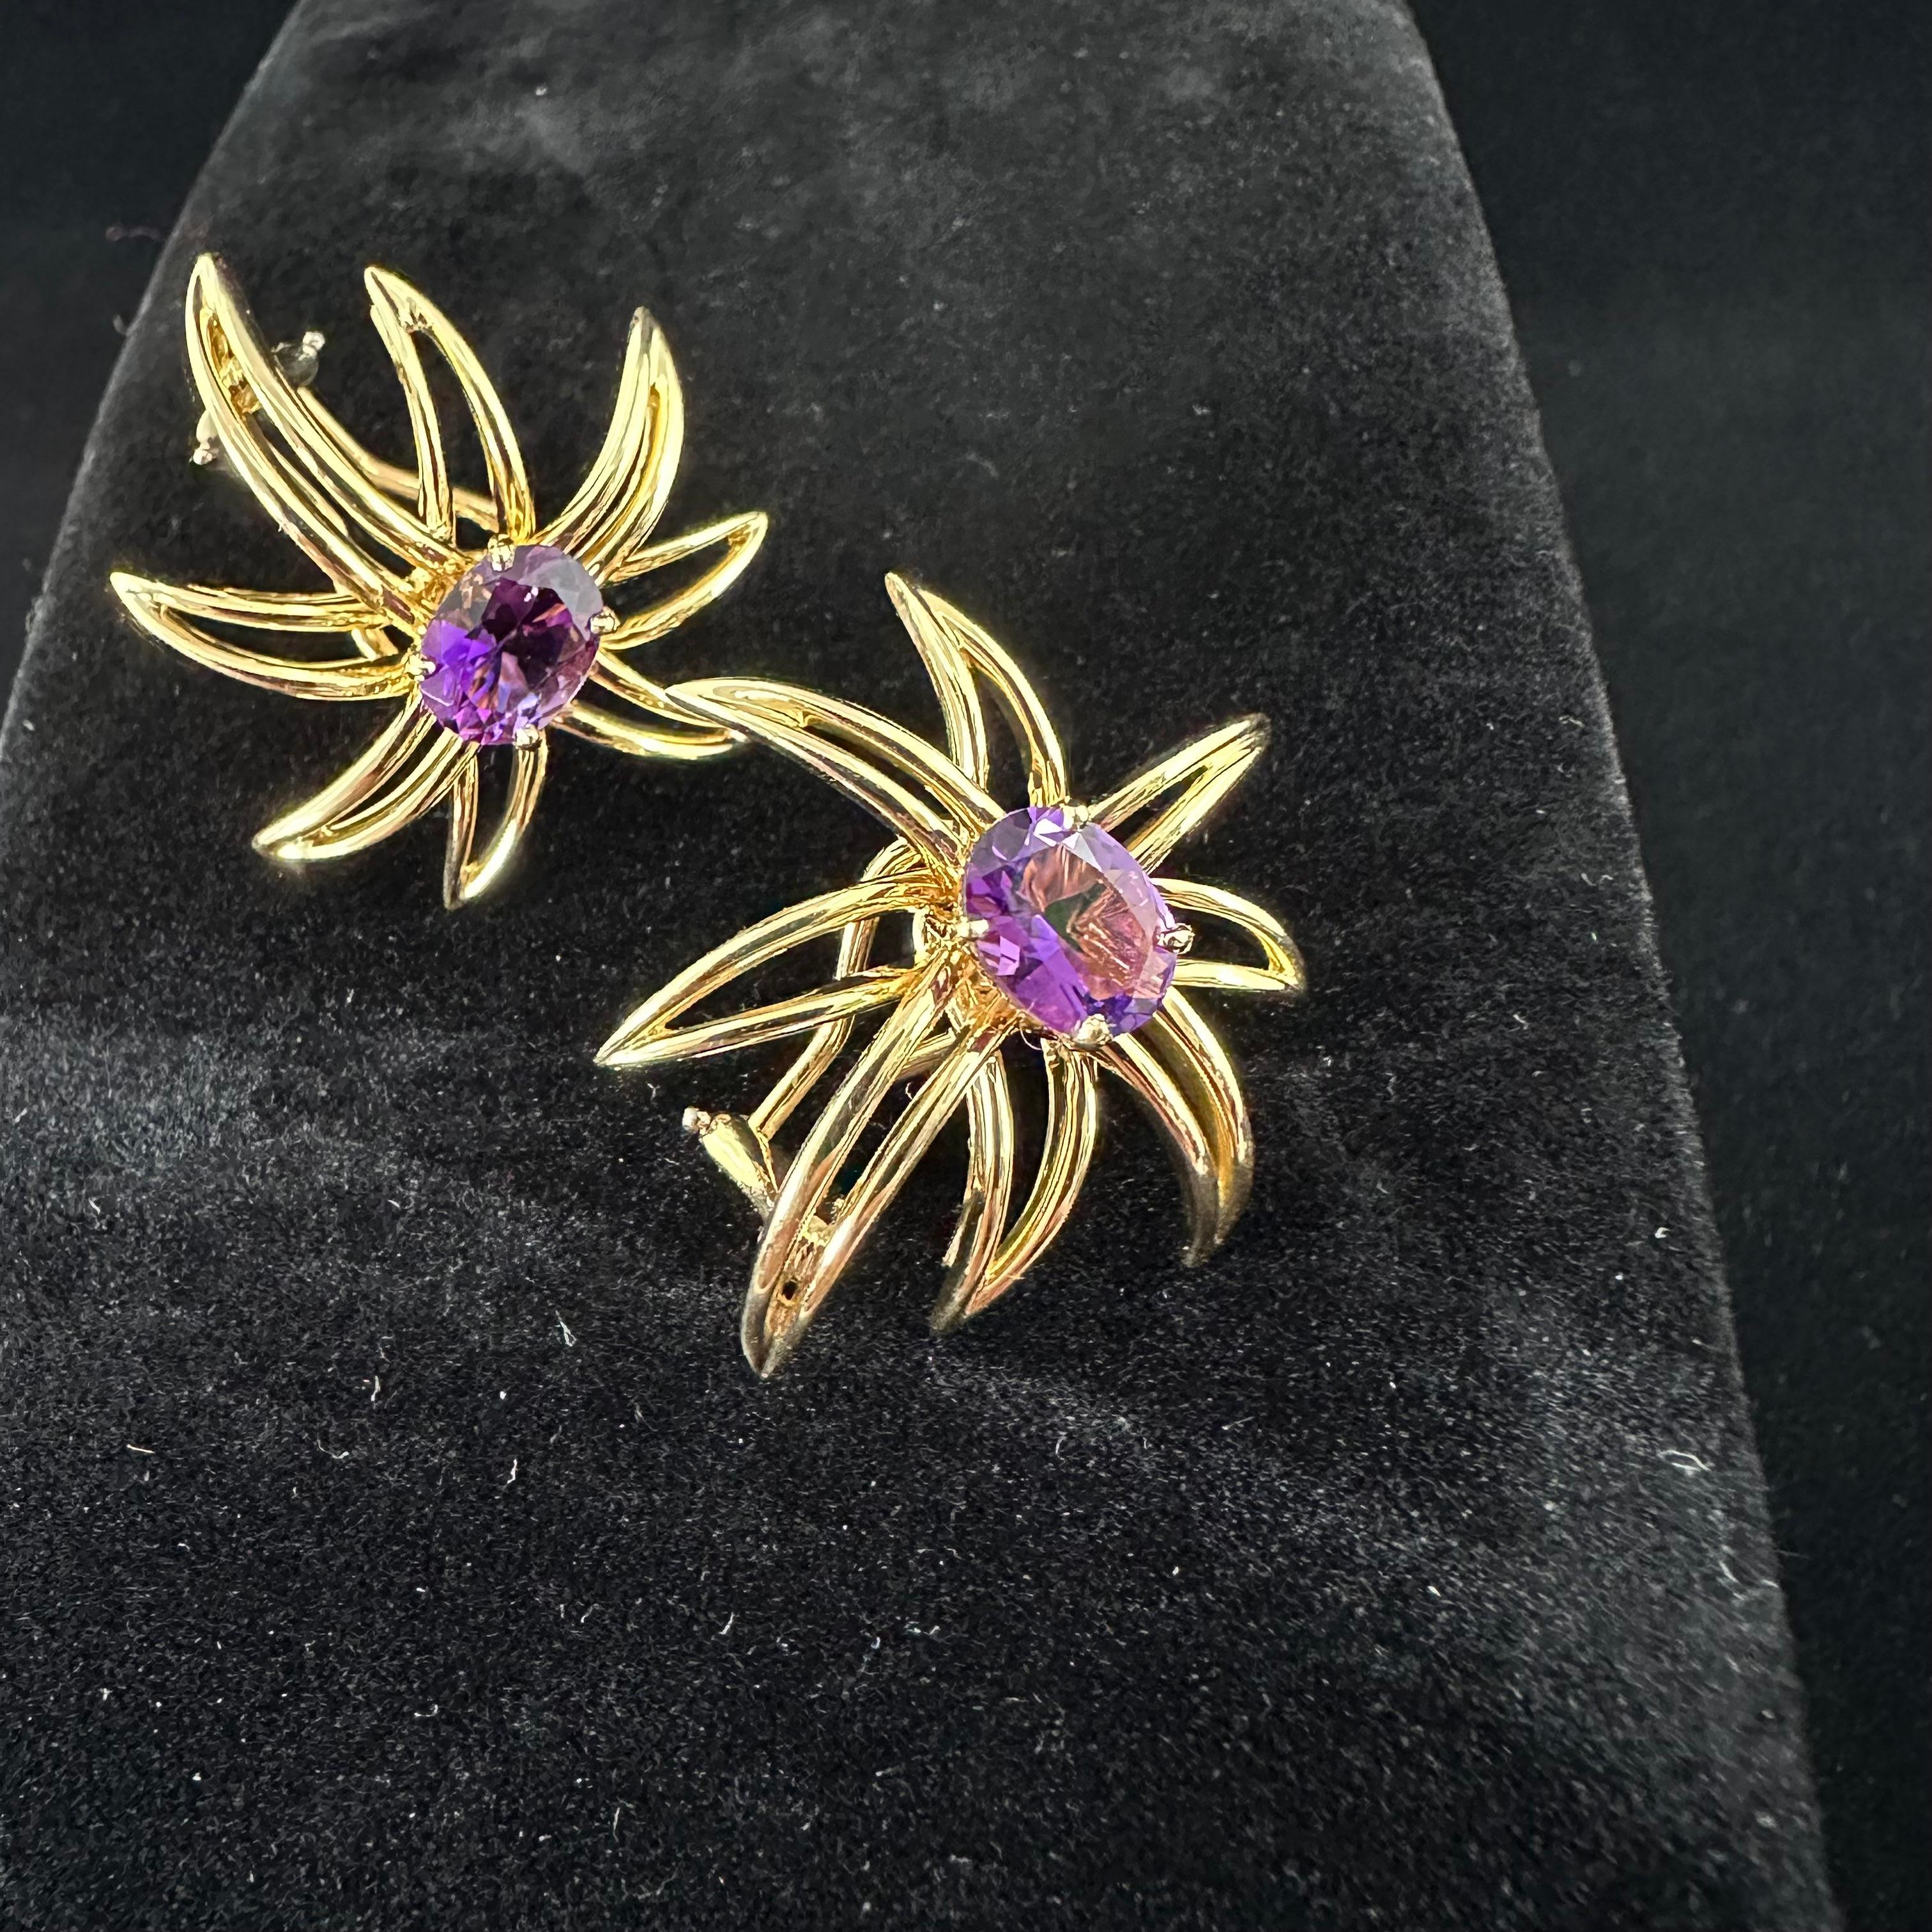 Tiffany And Co Amethyst Earrings.
From the now discontinued Fireworks Collection
Yellow Gold Earrings with Lever Backs  
Two Faceted Oval Amethyst 
Strong Purple Color Amethyst  approx 2cts total weight 
Signed Tiffany - Fireworks -18K

 
